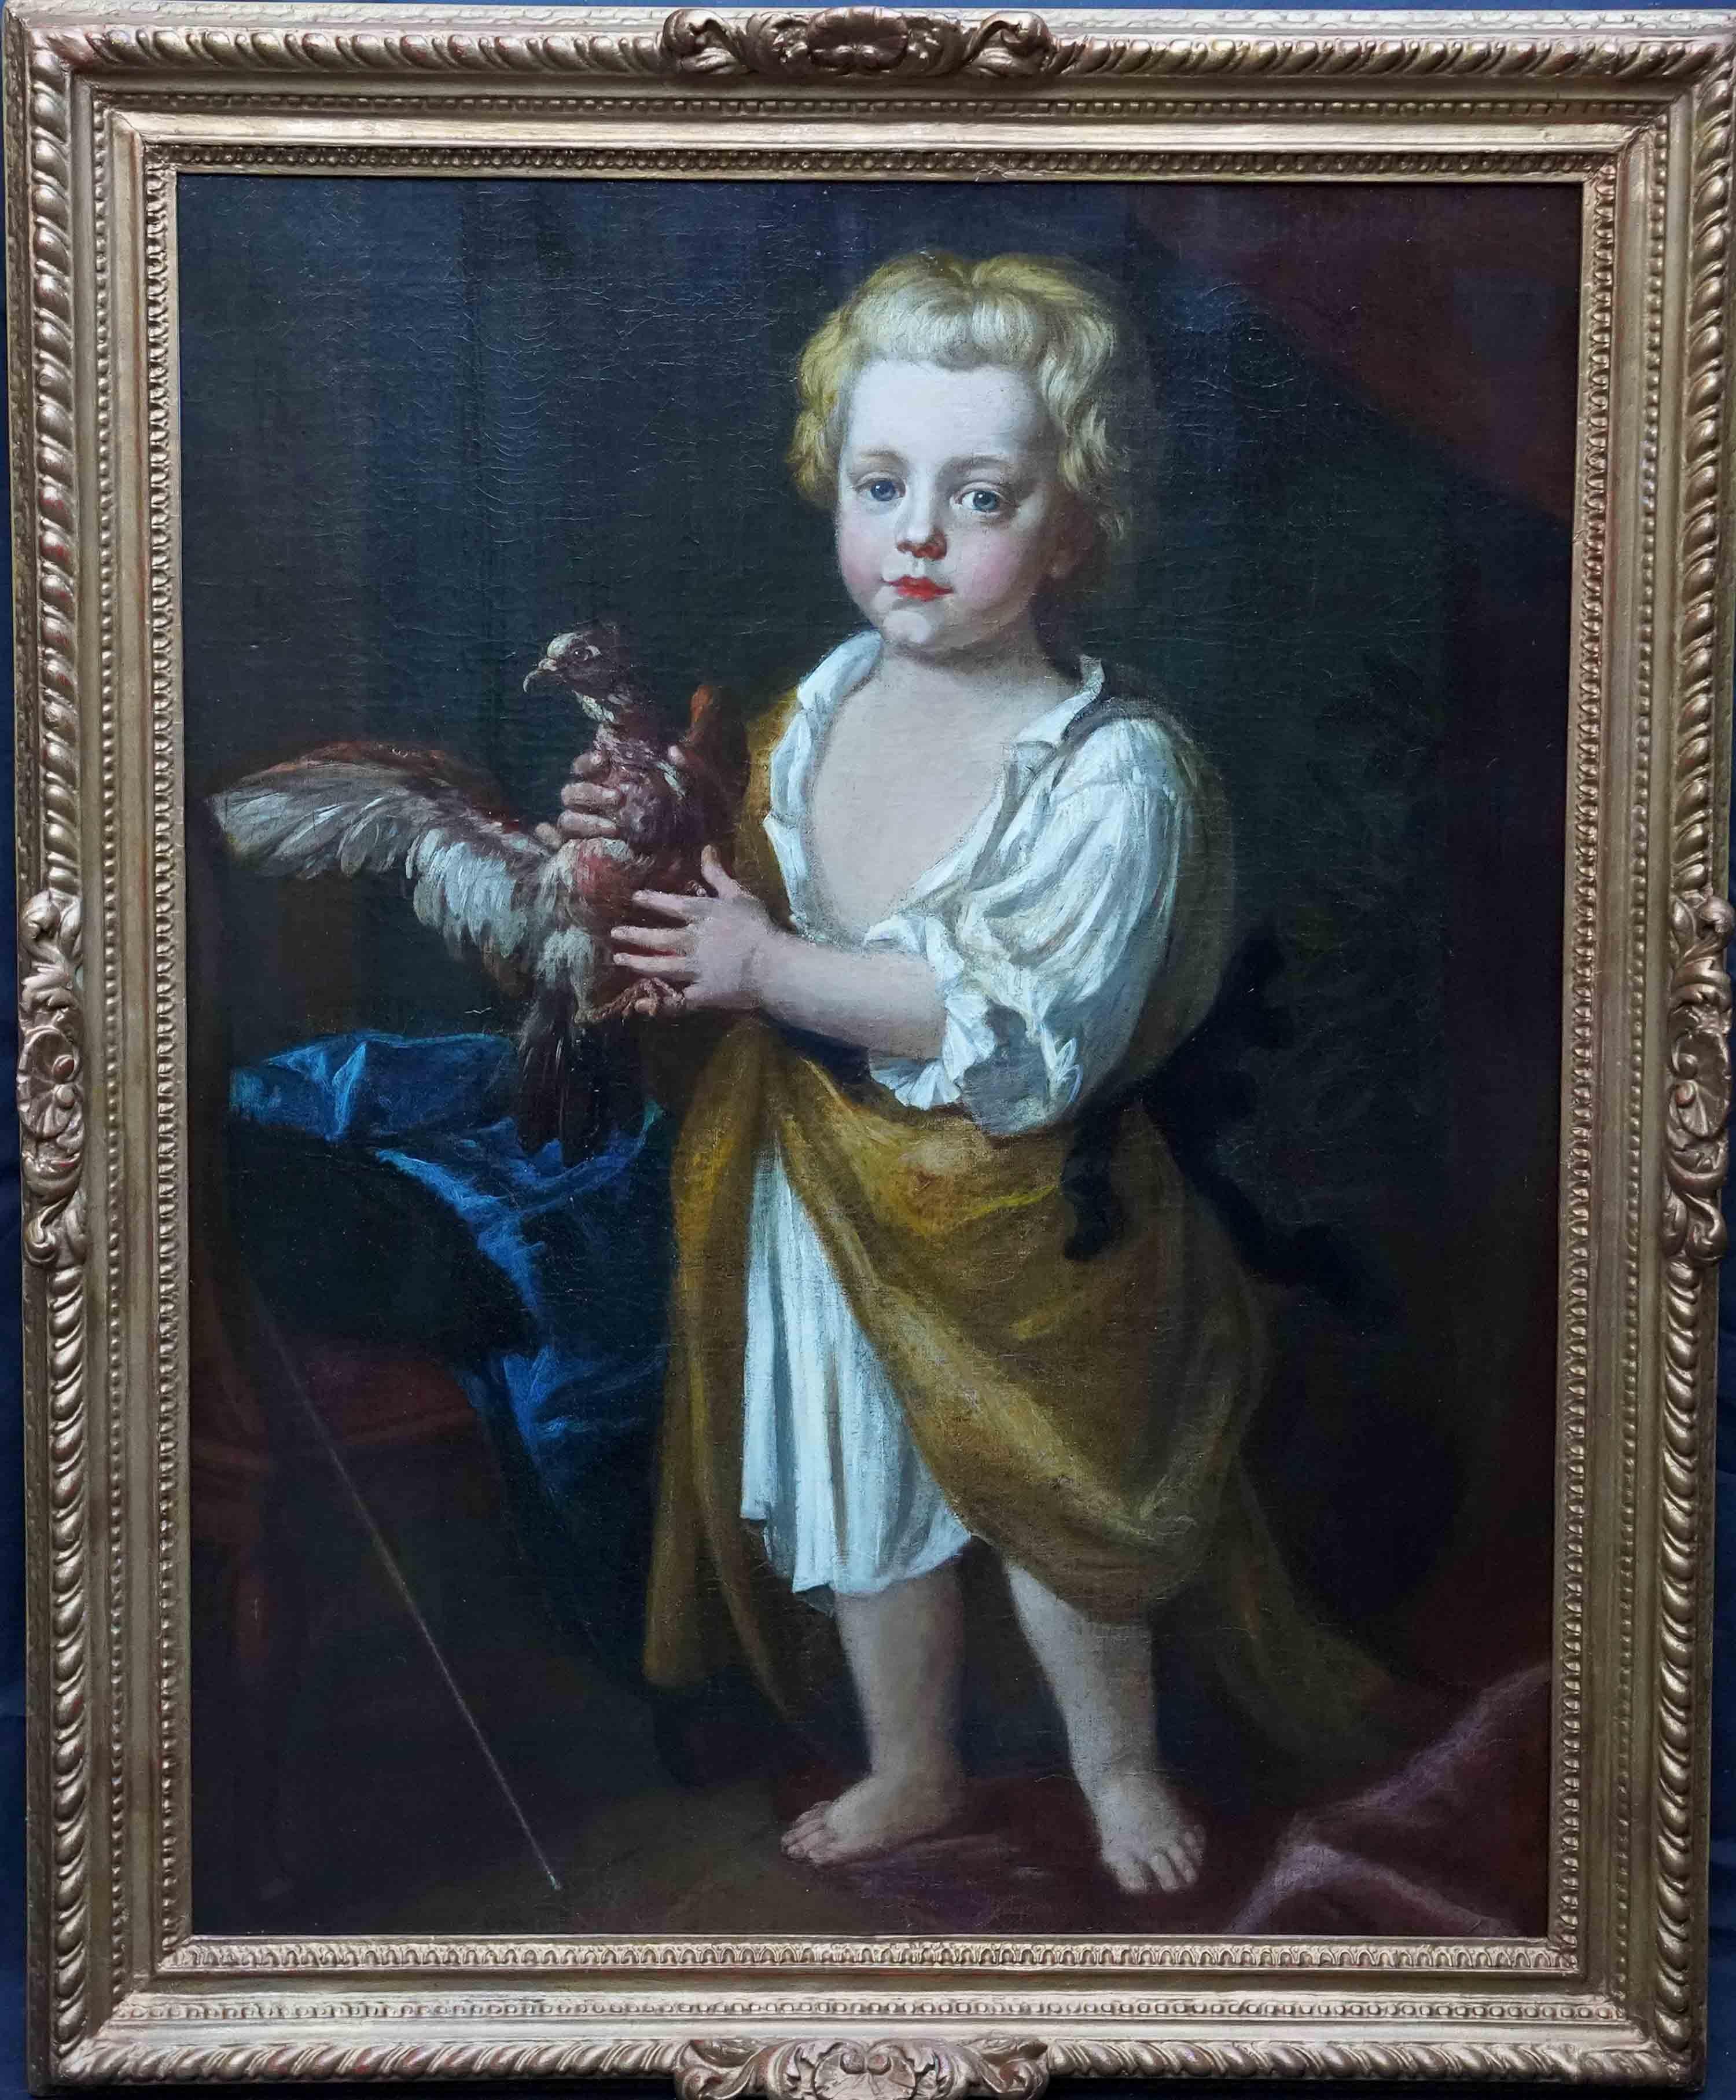 Sir Godfrey Kneller Portrait Painting - Portrait of a Boy with Bird - British 17thC  Old Master art oil painting